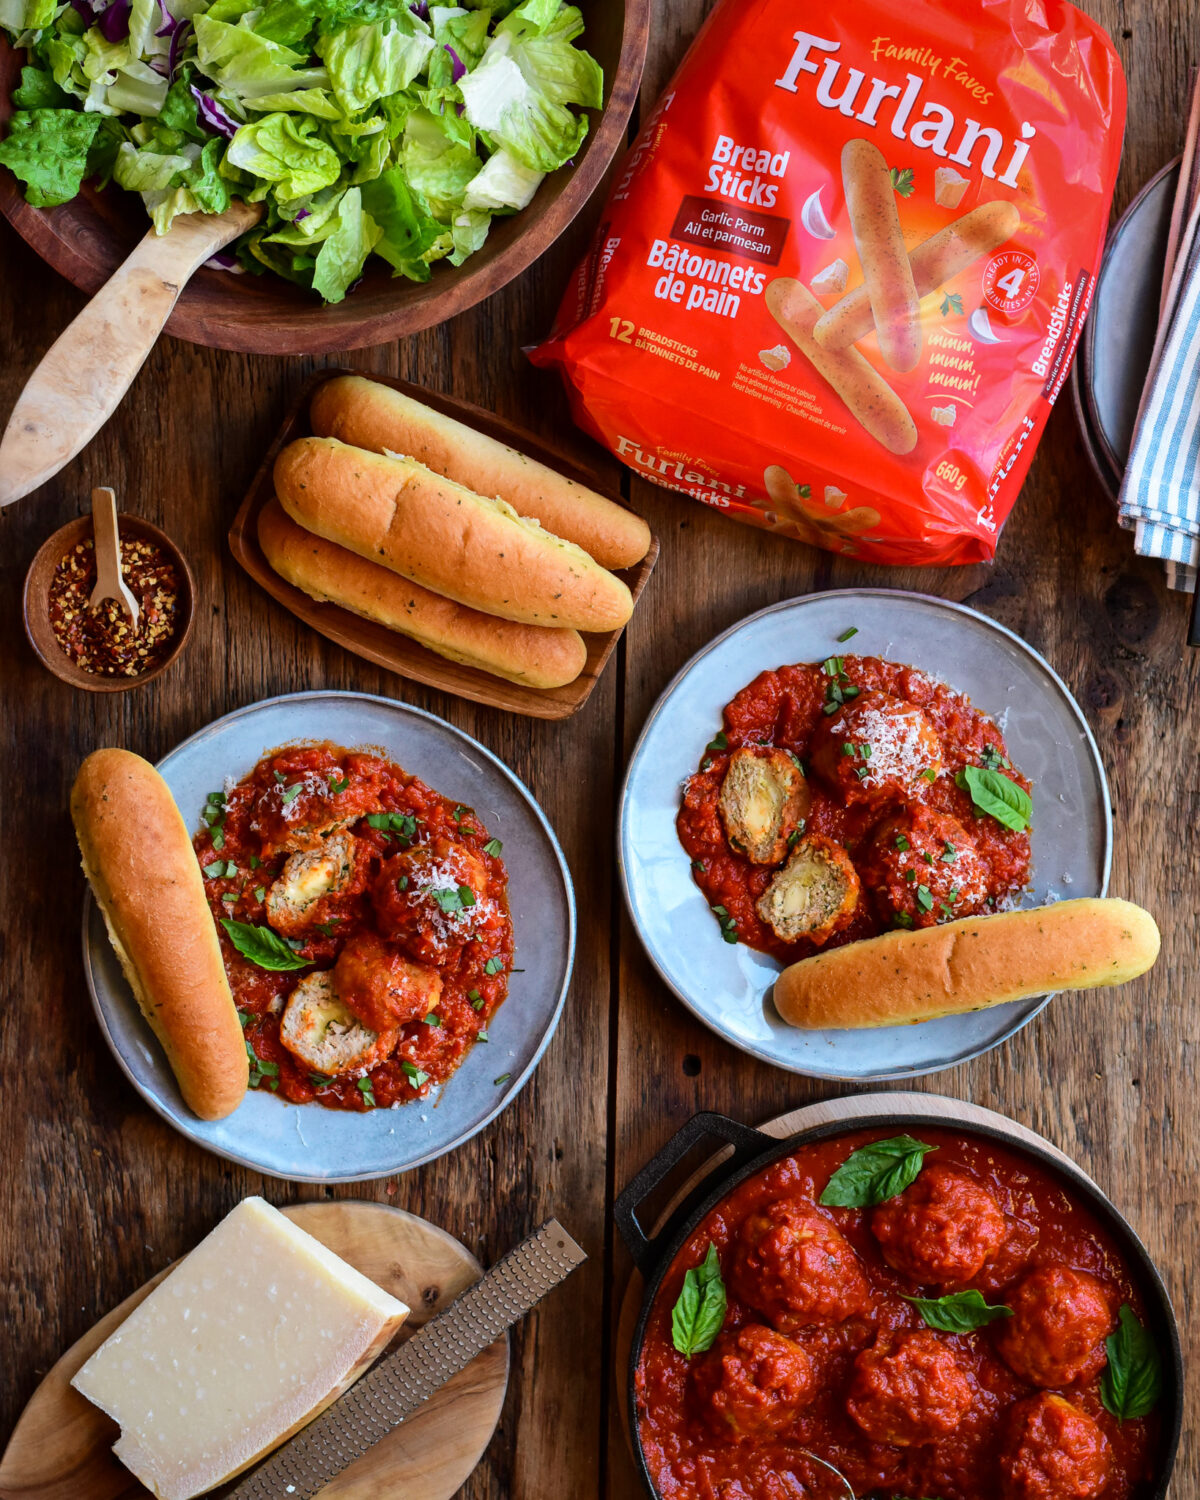 Two plates with meatballs in sauce with breadsticks. The meatballs are cut open and you can see the cheese in the center. Served with a salad grated parmesan and more meatballs in sauce.